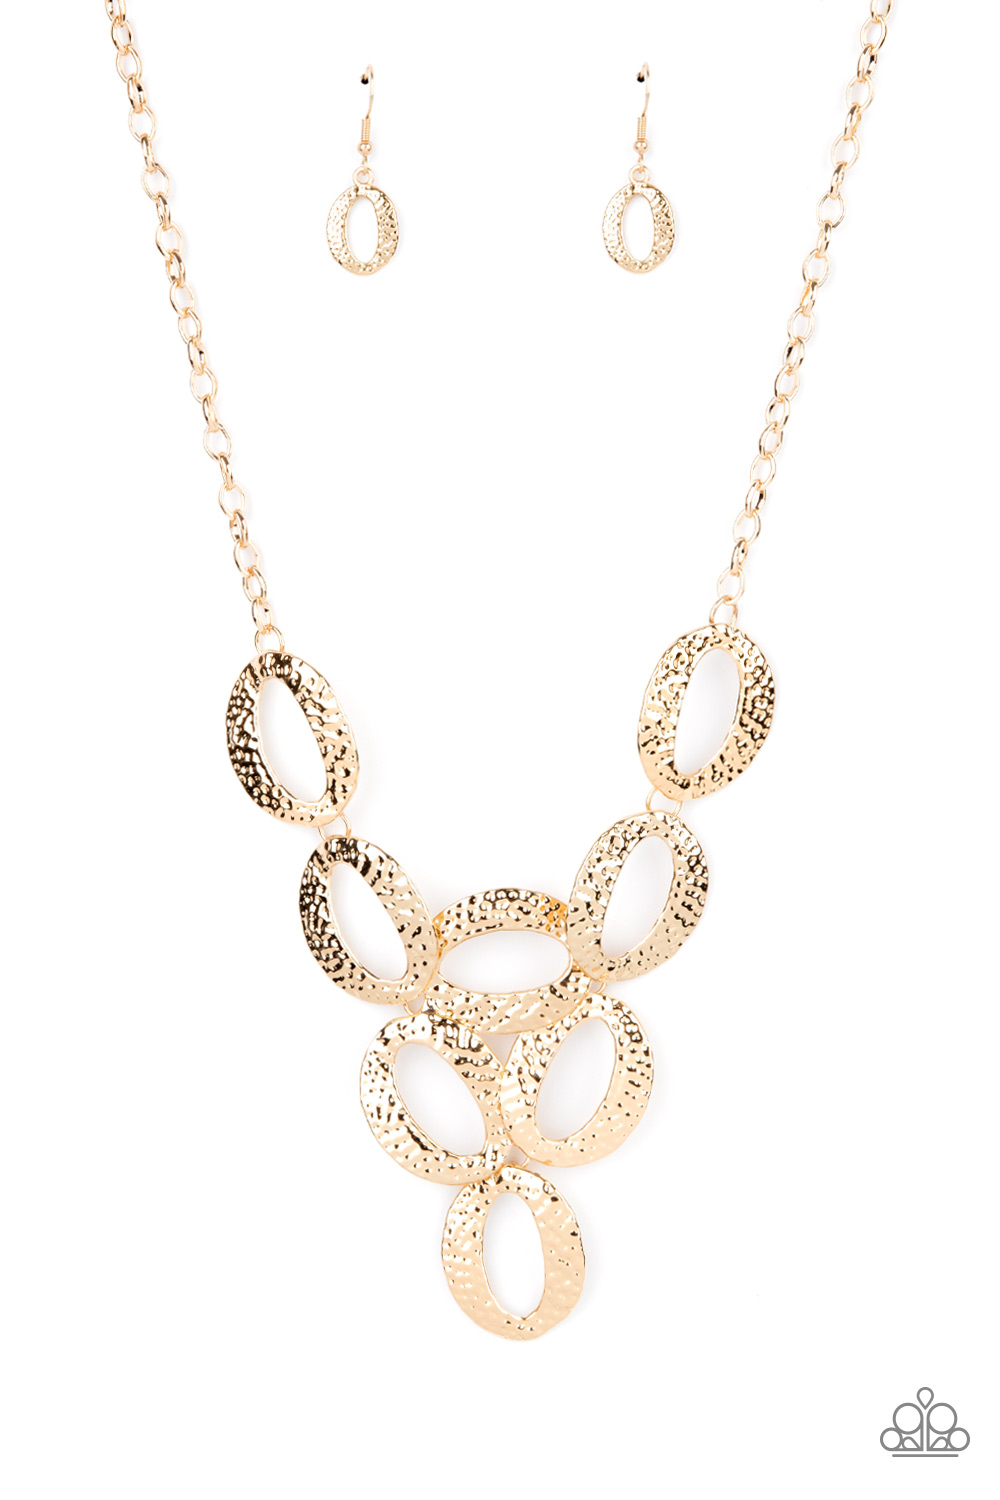 Paparazzi Accessories: OVAL The Limit - Gold | Paparazzi Accessories